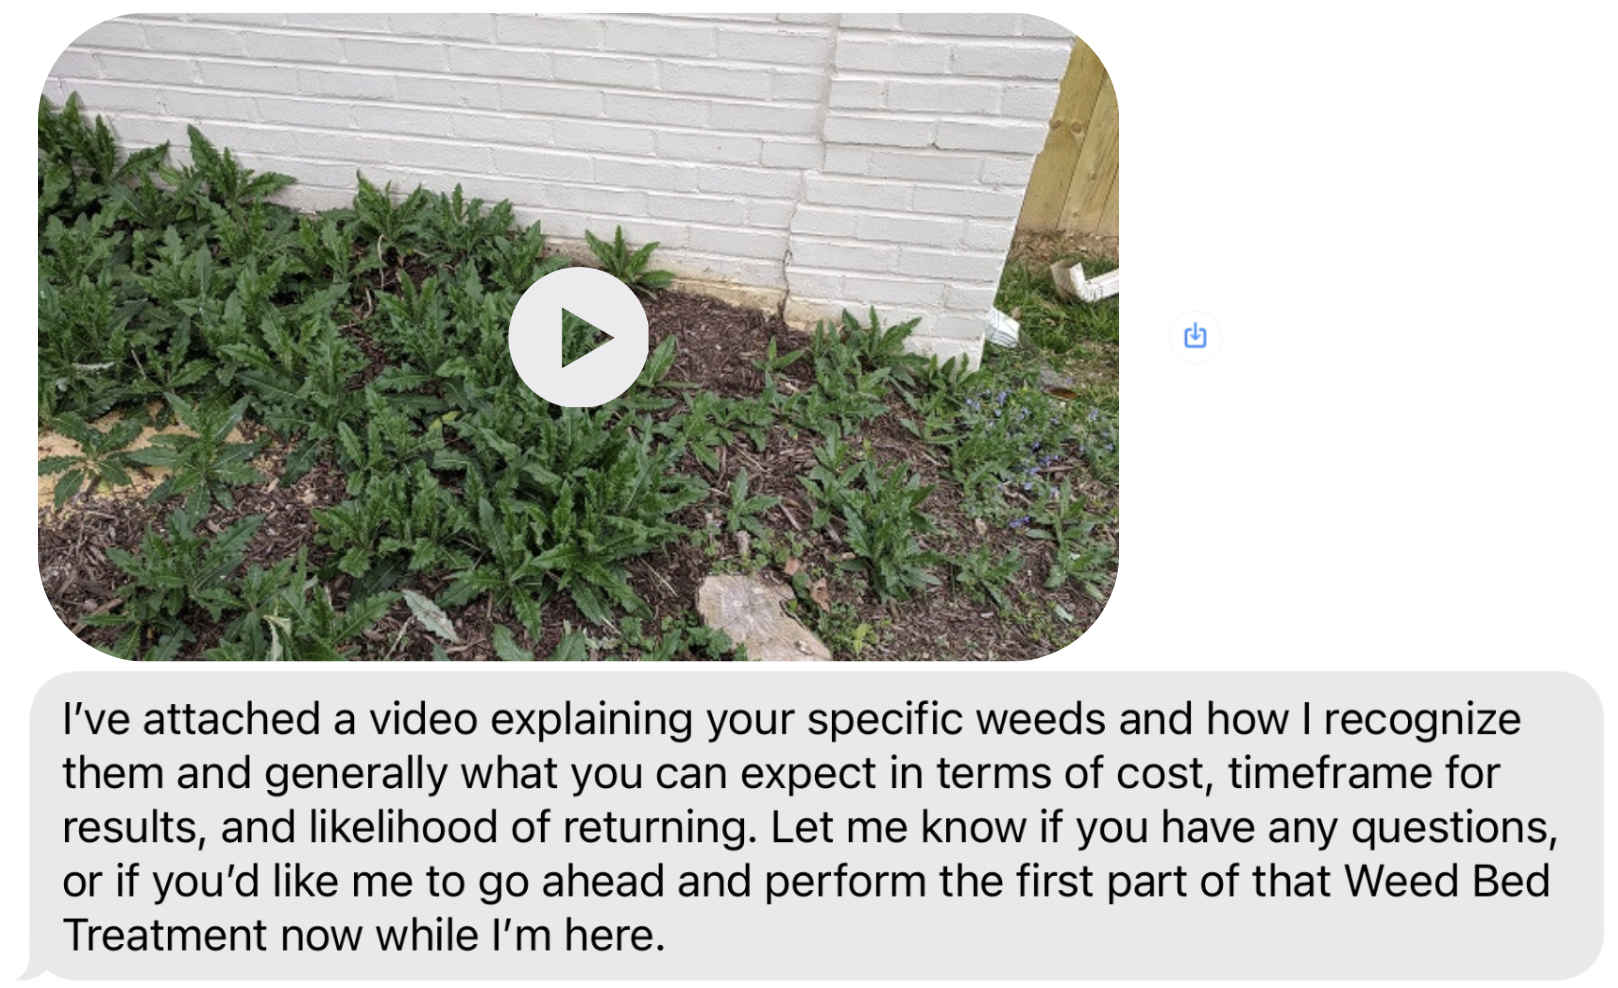 lawn care advisor sending a video via SMS MMS to show customer weeding options and review service costs and information